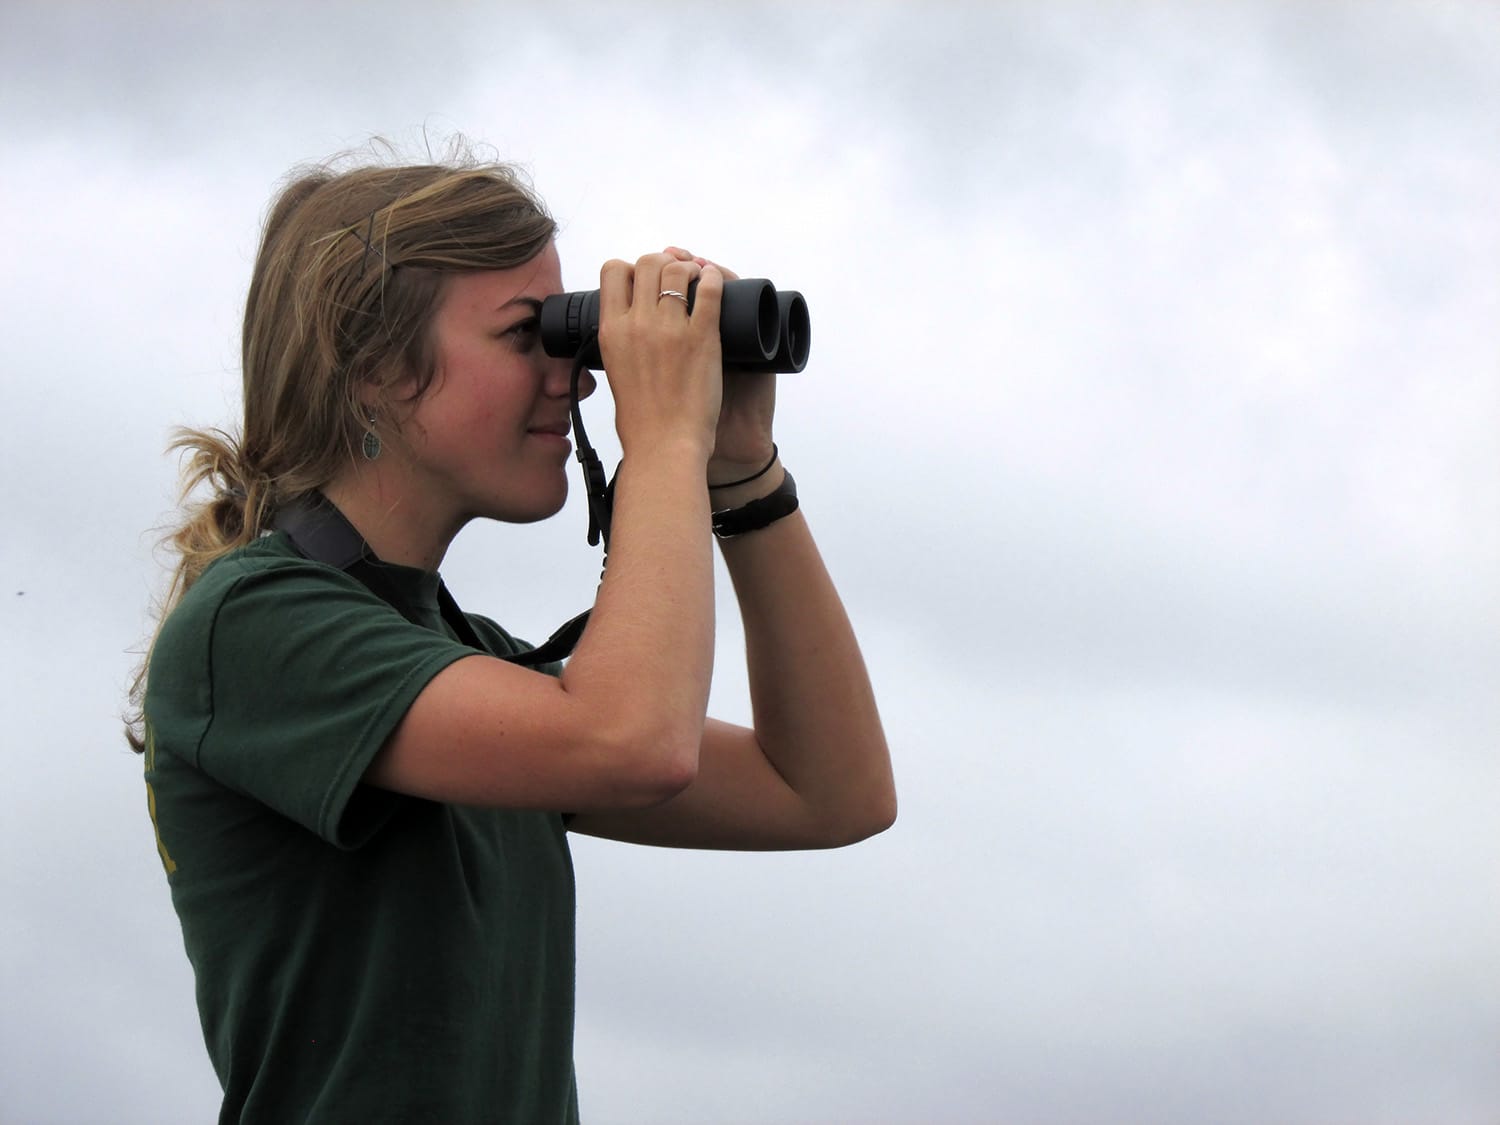 Emily Kimmel keeps her eyes on the skies during a previous Hawk Watch at Grandfather Mountain. Binoculars and cameras aid in viewing the migrating raptors, but most birds are visible with the naked eye. Photo courtesy of the Grandfather Mountain Stewardship Foundation